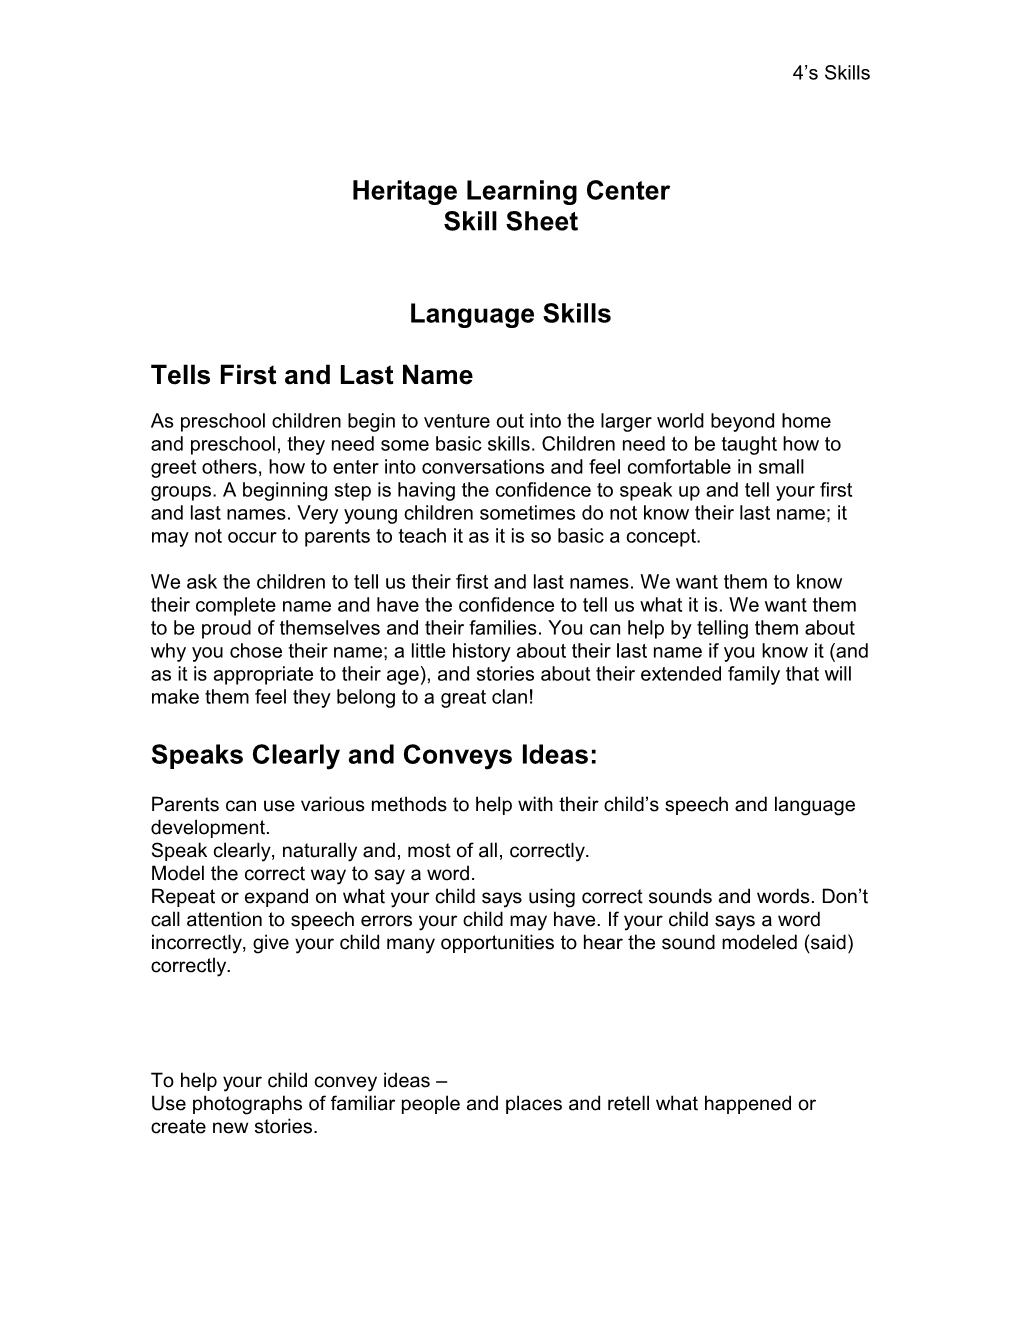 Heritage Learning Center